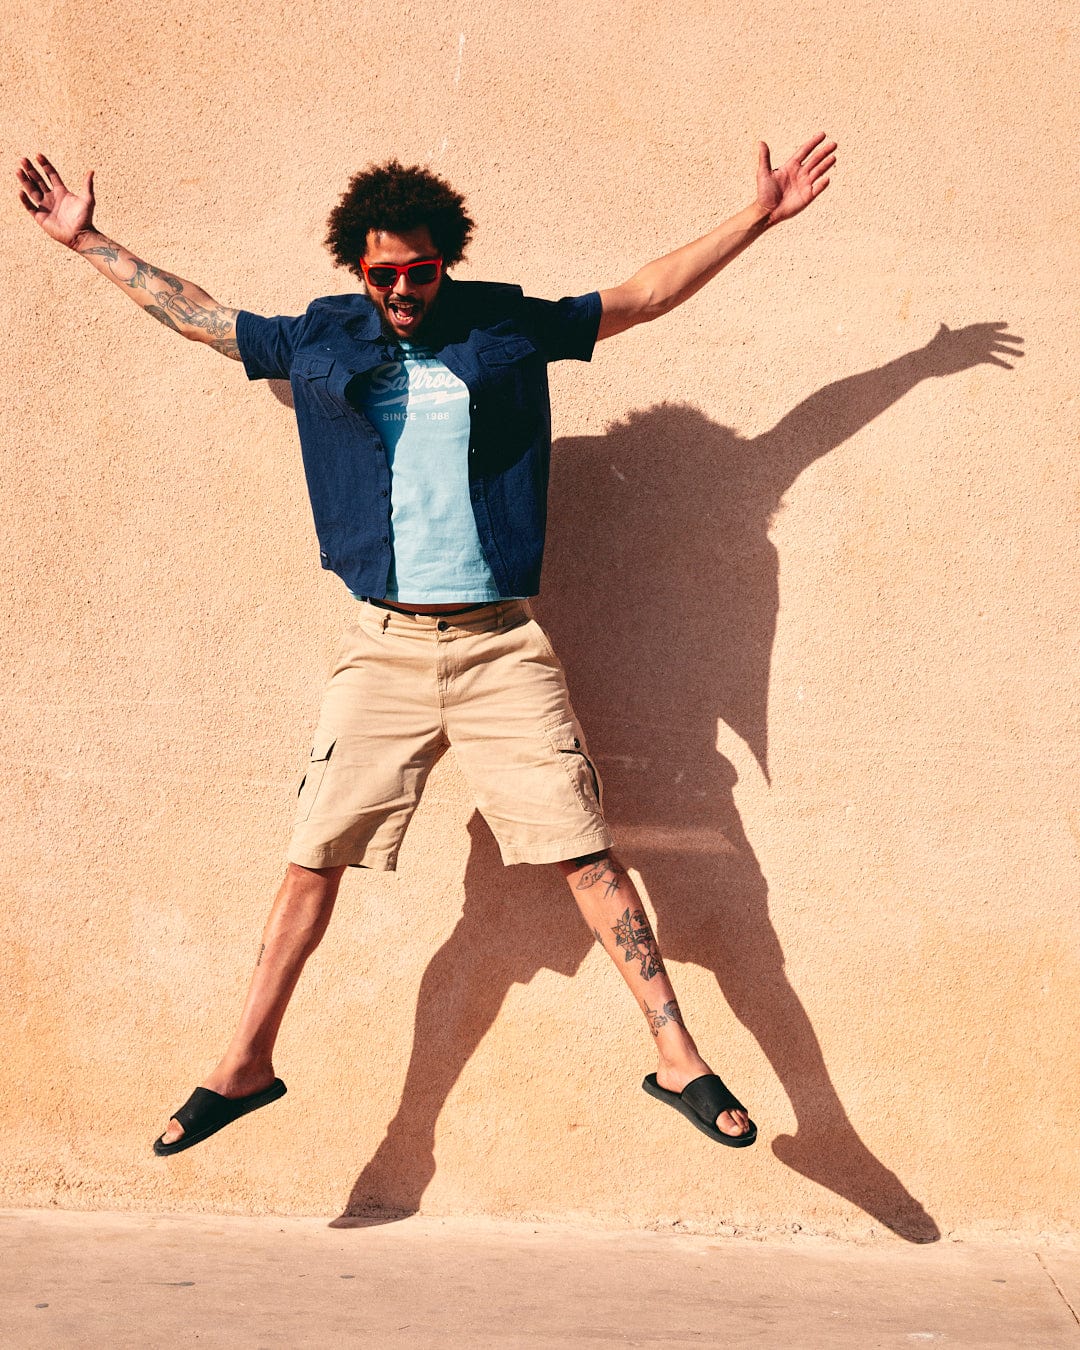 A joyful man with sunglasses and curly hair jumps mid-air against a beige wall, casting a dynamic shadow on the Saltrock Polperro - Mens Short Sleeve Shirt in Blue.